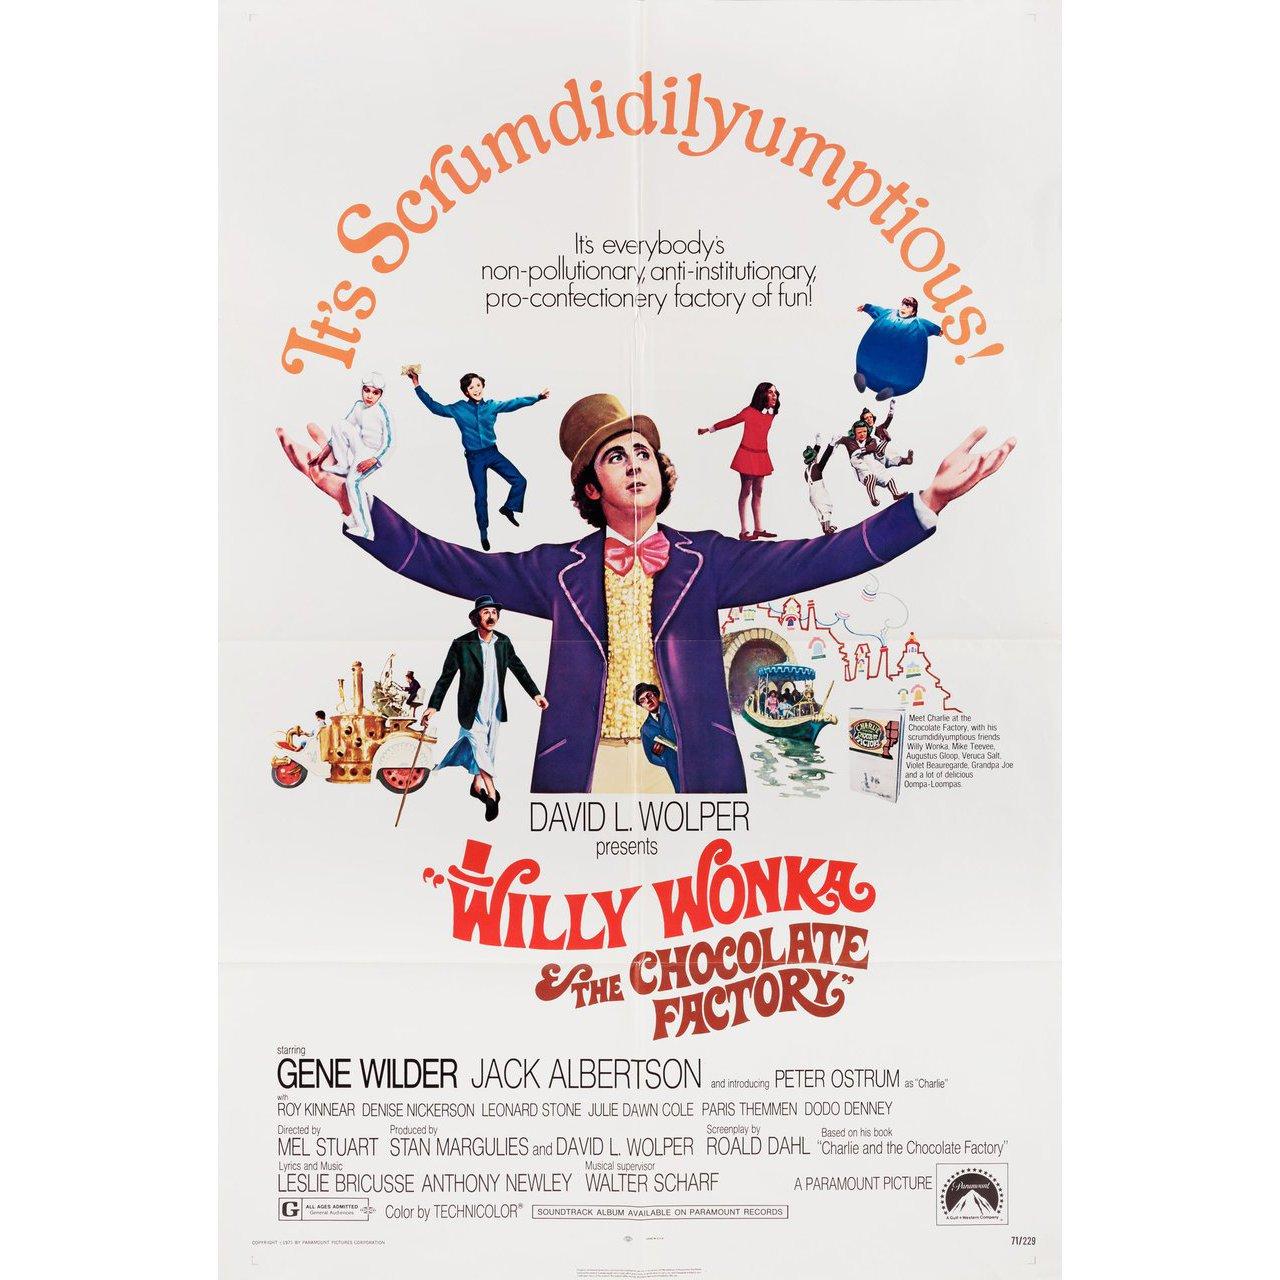 Original 1971 U.S. one sheet poster for the film Willy Wonka & the Chocolate Factory directed by Mel Stuart with Gene Wilder / Jack Albertson / Peter Ostrum / Roy Kinnear. Very Good-Fine condition, folded. Many original posters were issued folded or